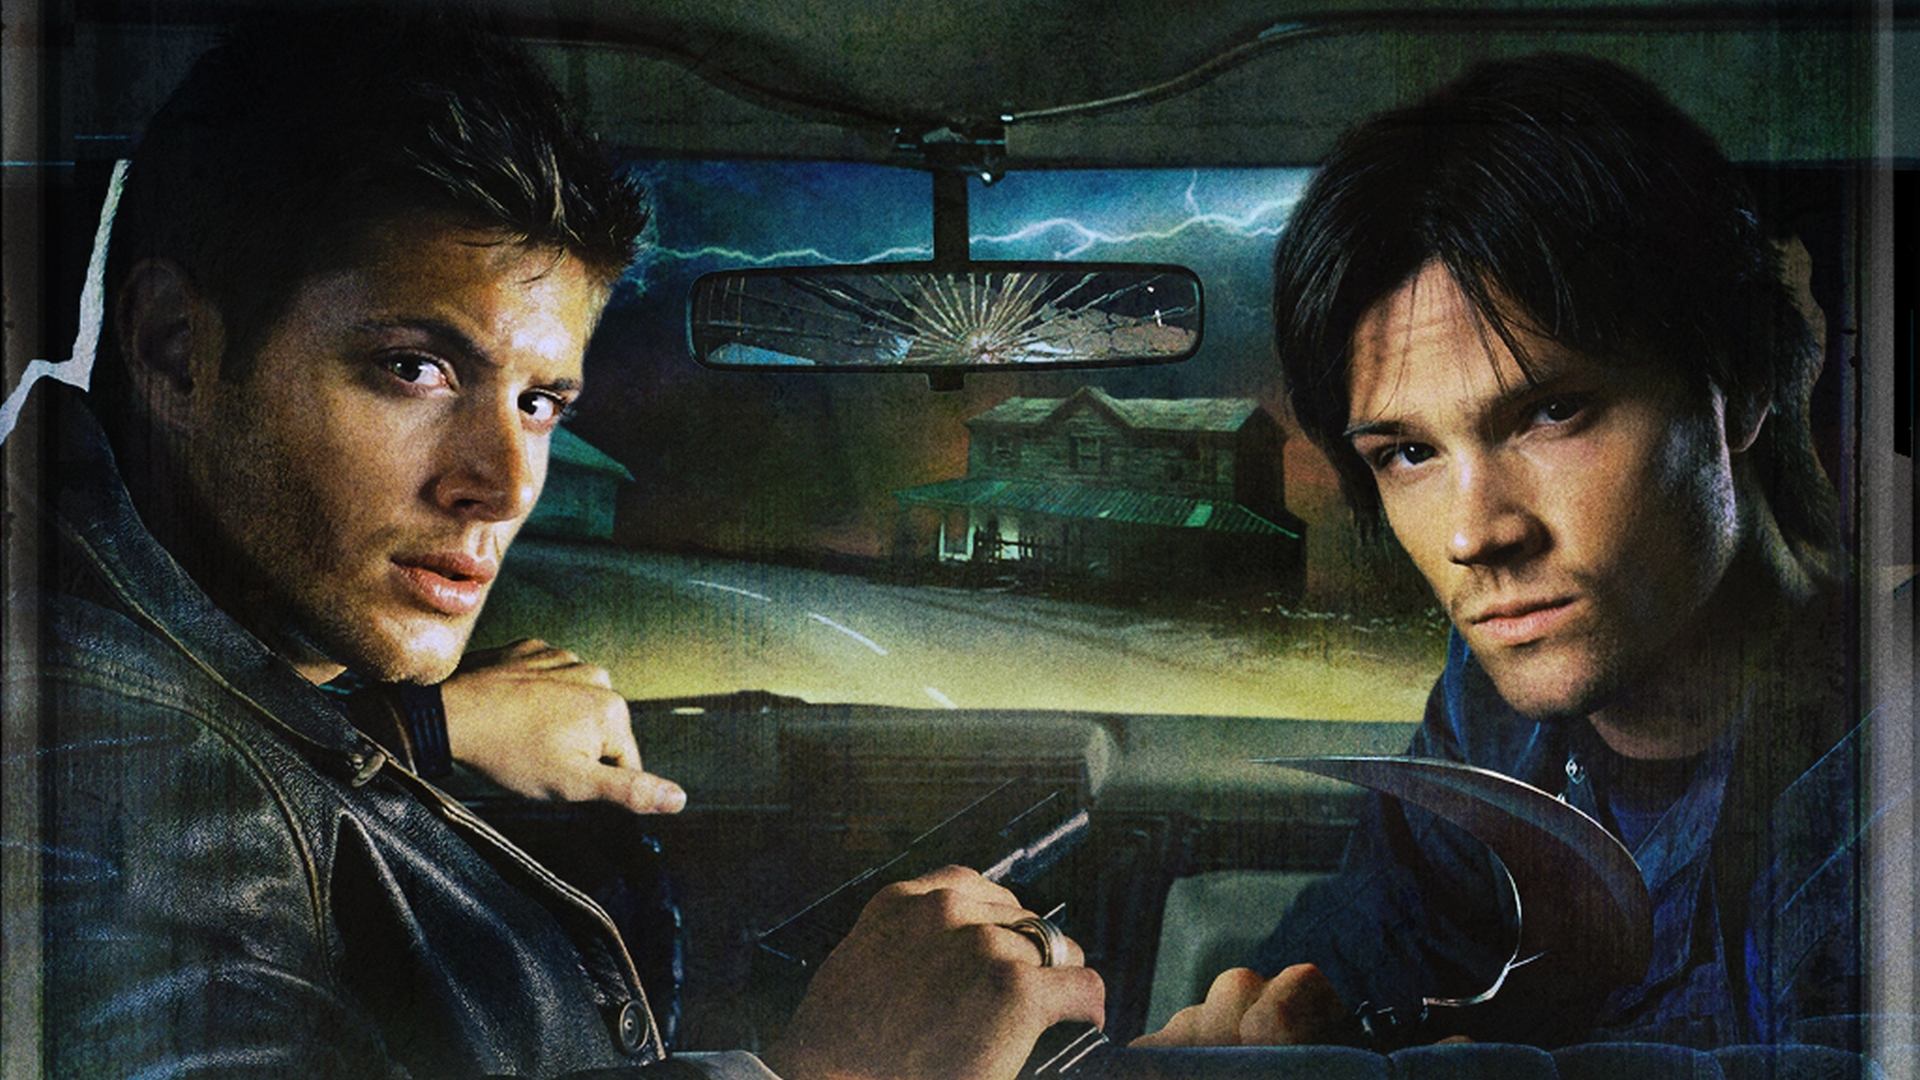 Supernatural Wallpapers Pictures Images